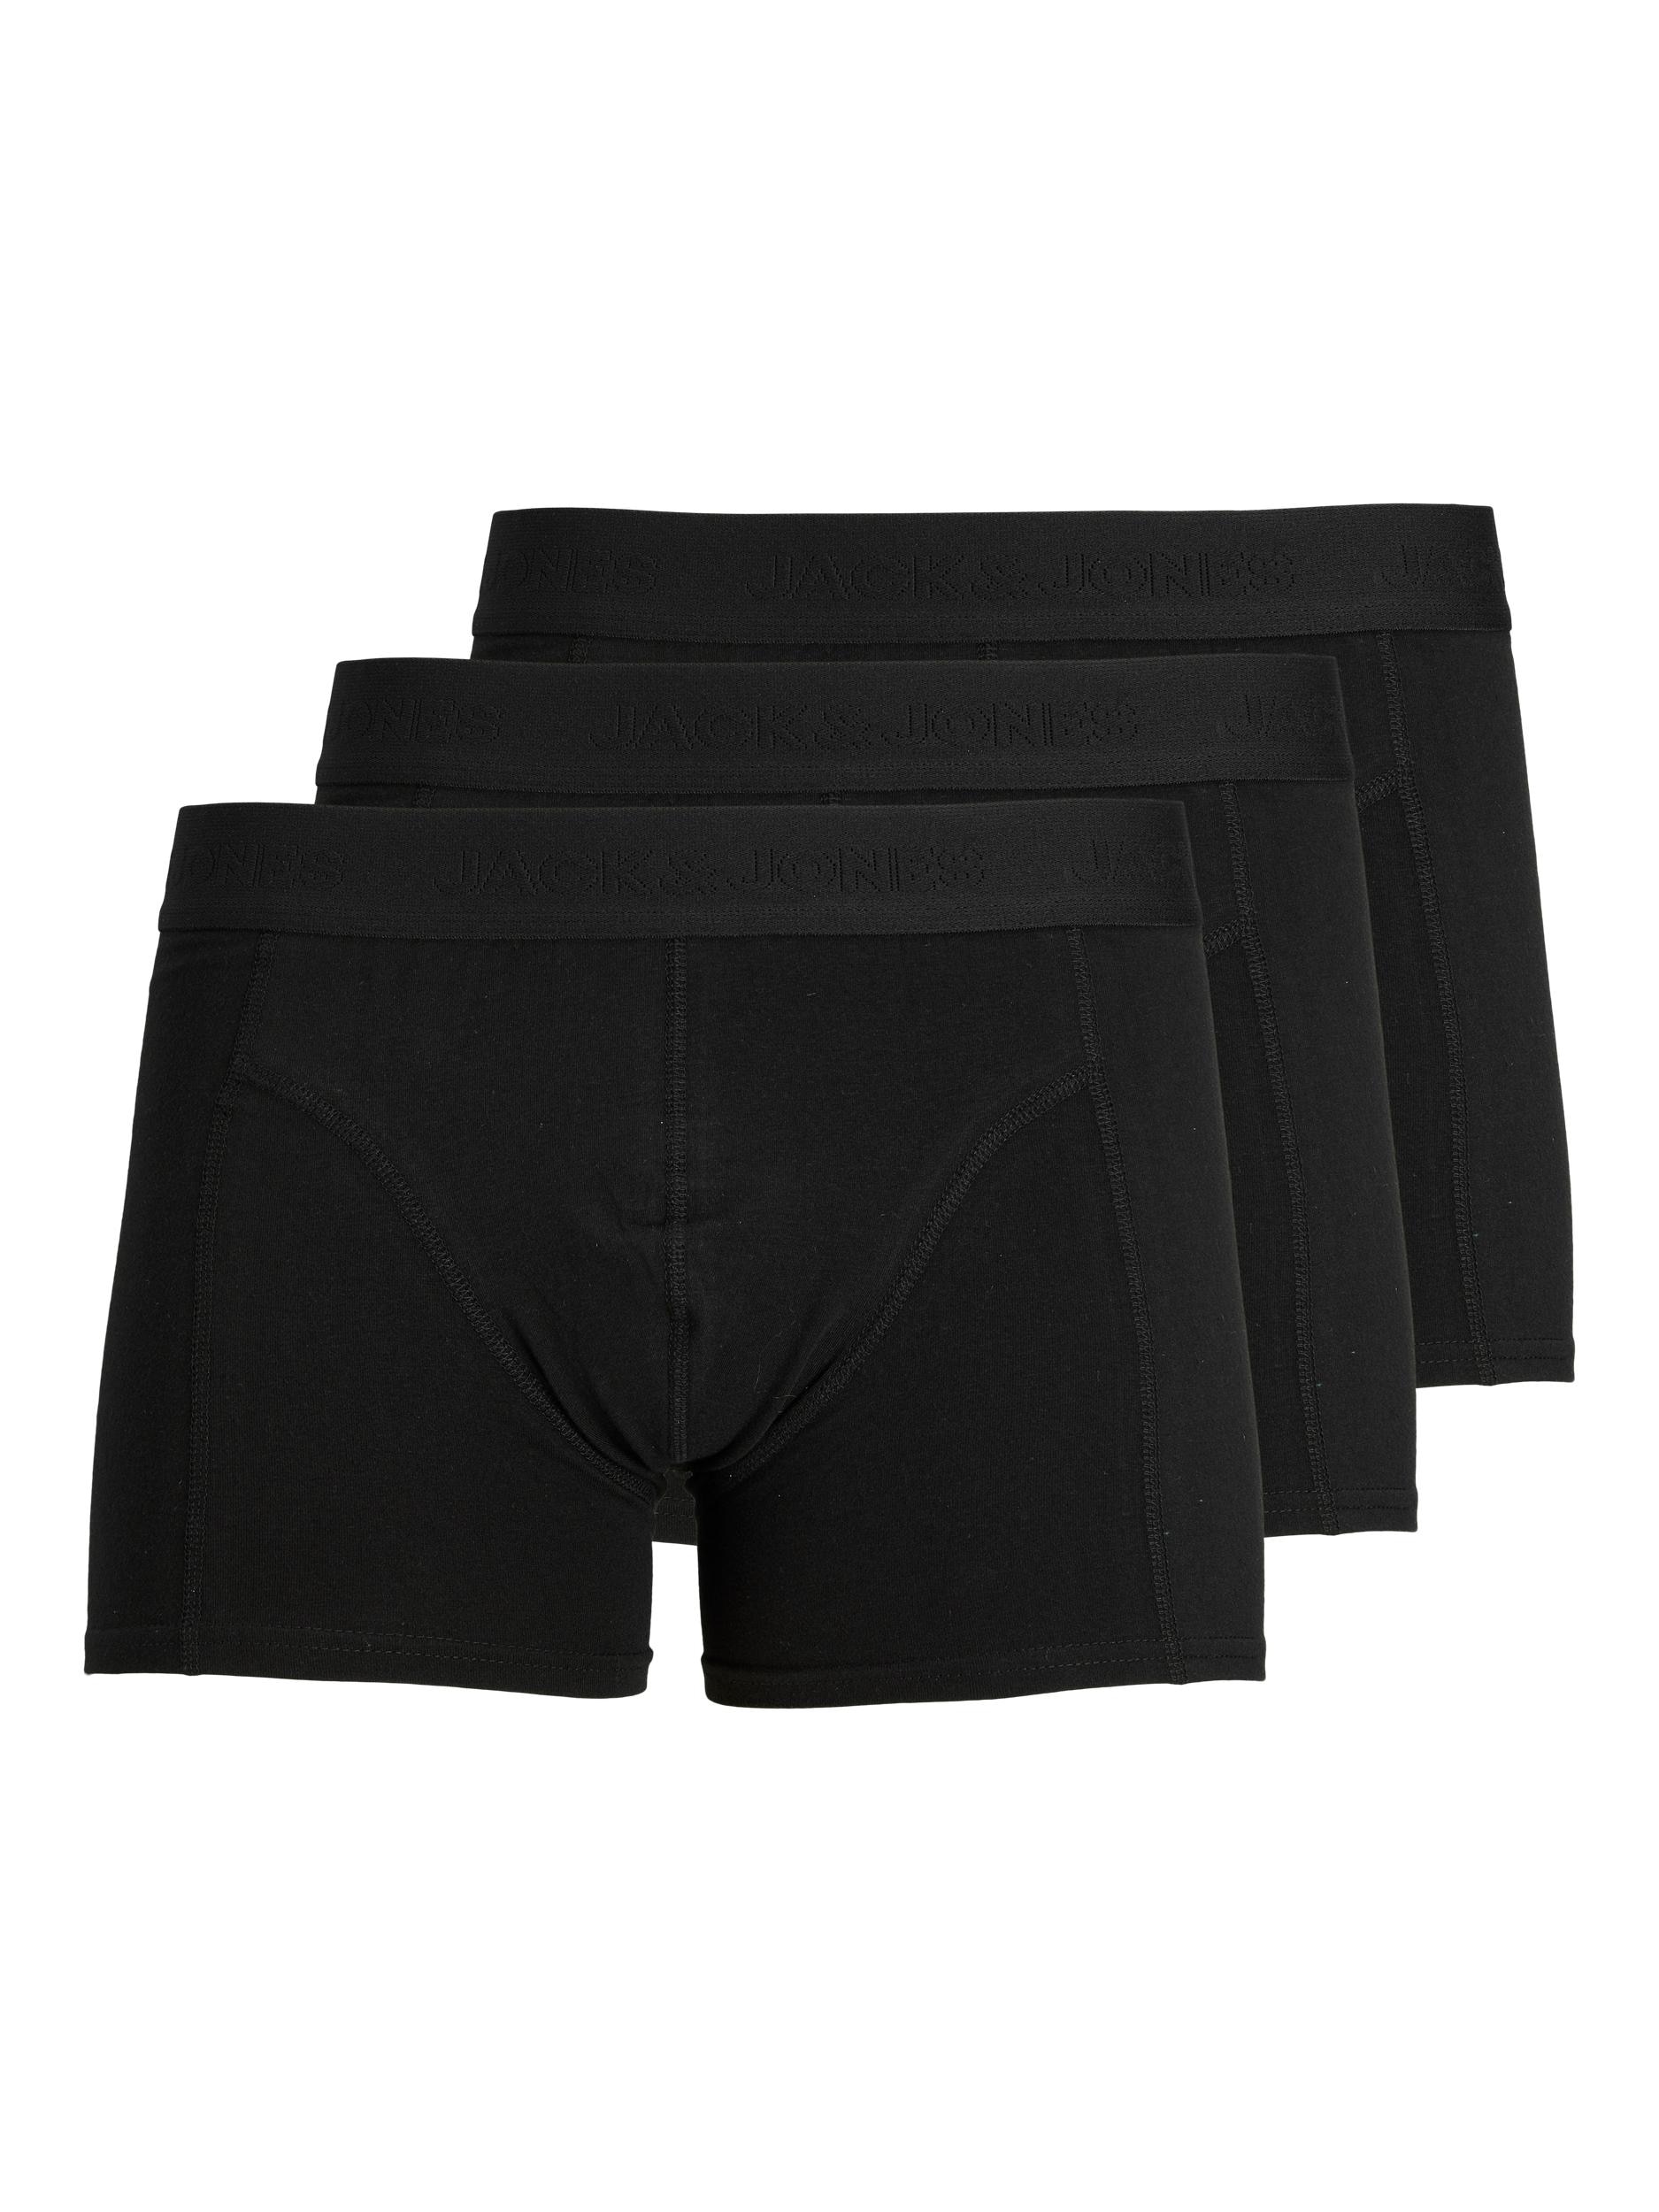 Trunk »JACWAISTBAND TRUNKS 3 PACK NOOS«, (Packung, 3 St., 3er-Pack)